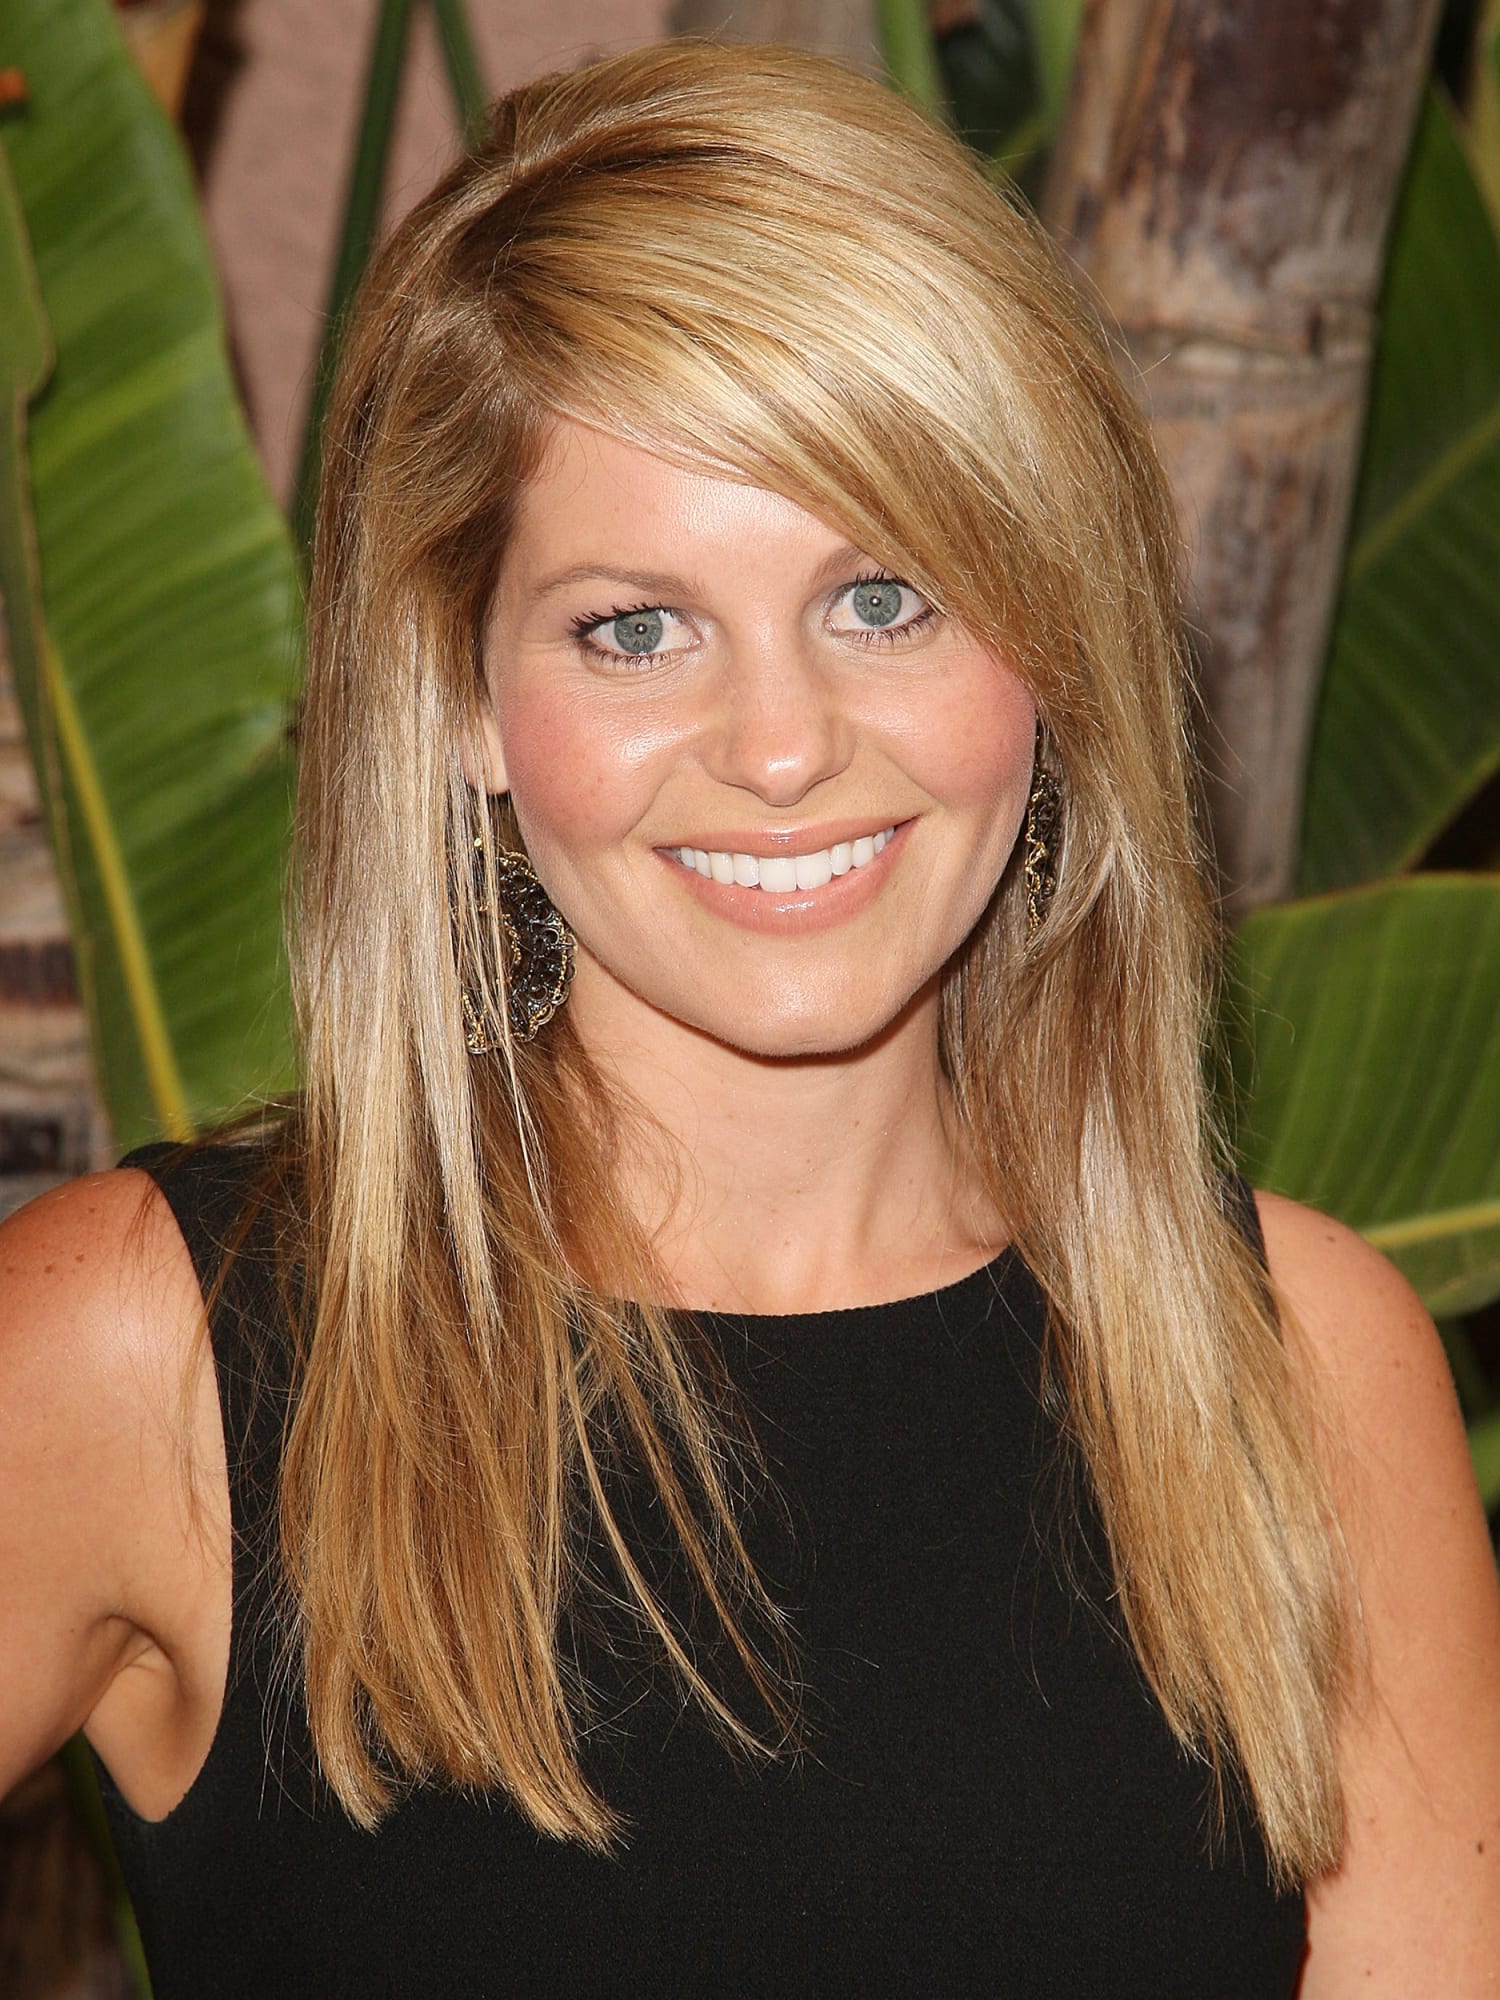 Candace Cameron Bure's hair is now red! See her new look